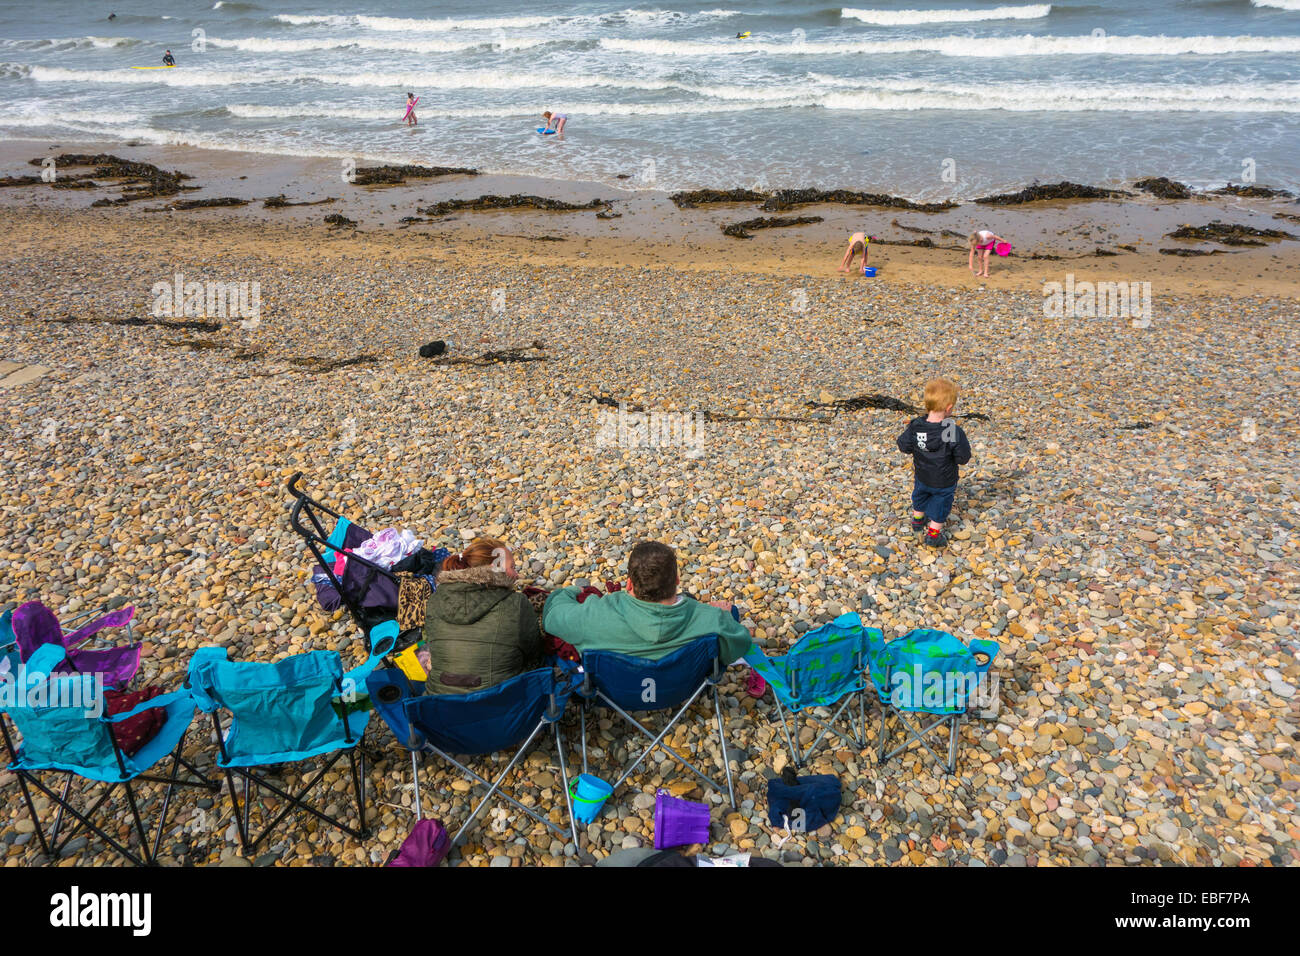 Family on pebbly beach parents and children holiday beach scene, Saltburn by the Sea, holiday resort Stock Photo